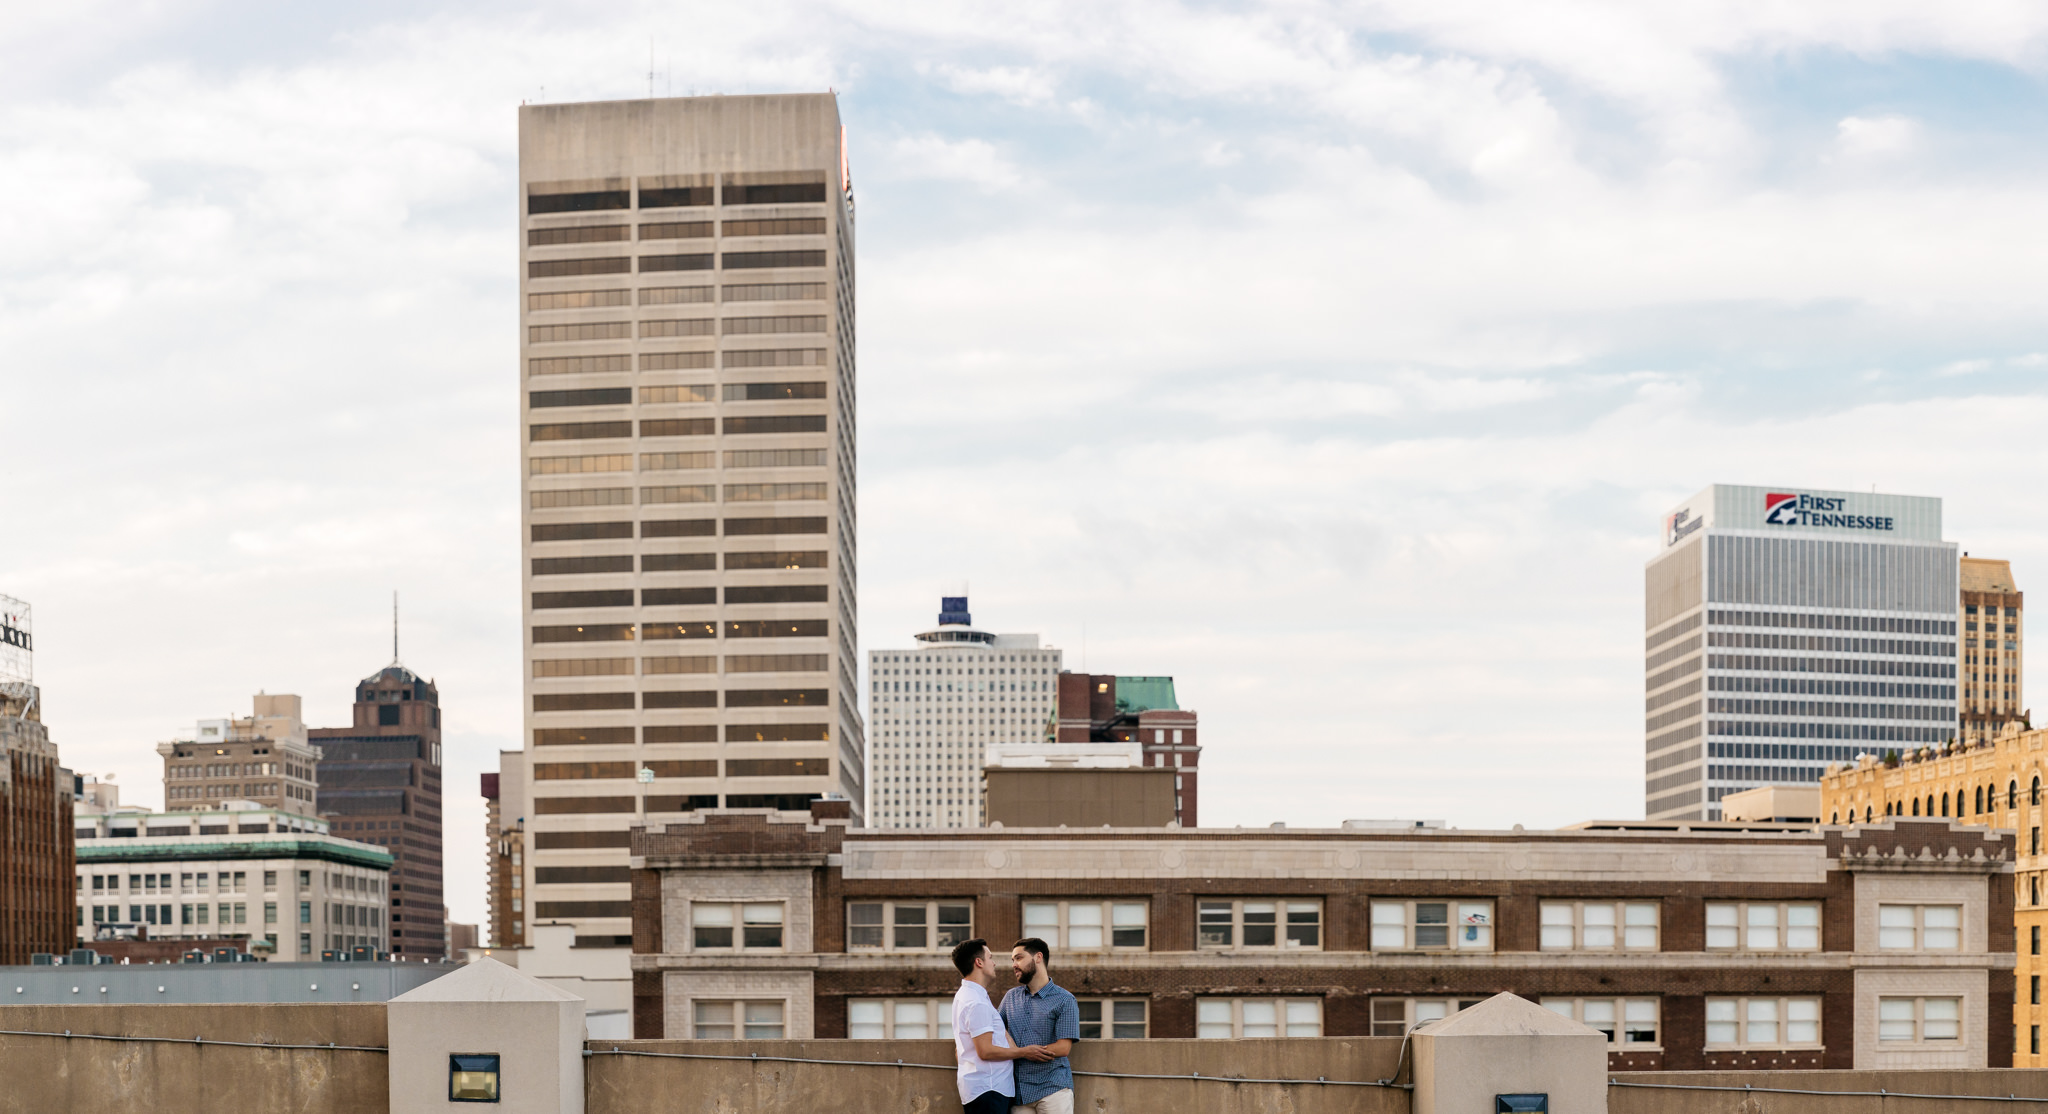 peabody-engagement-pictures-downtown-memphis-thewarmtharoundyou-shelby-alex-59.jpg